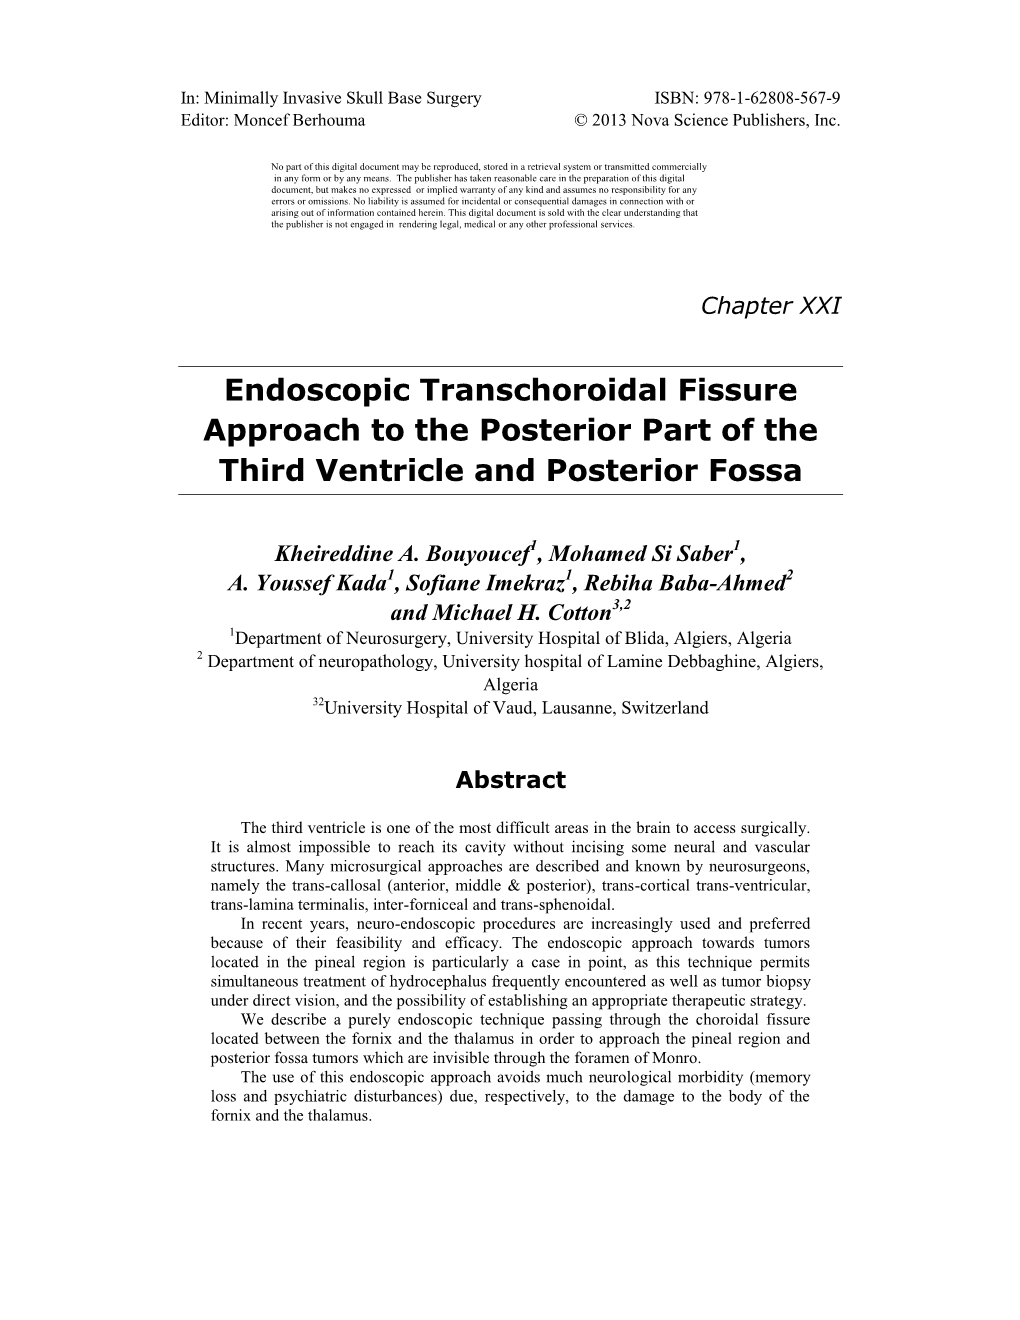 Endoscopic Transchoroidal Fissure Approach to the Posterior Part of the Third Ventricle and Posterior Fossa